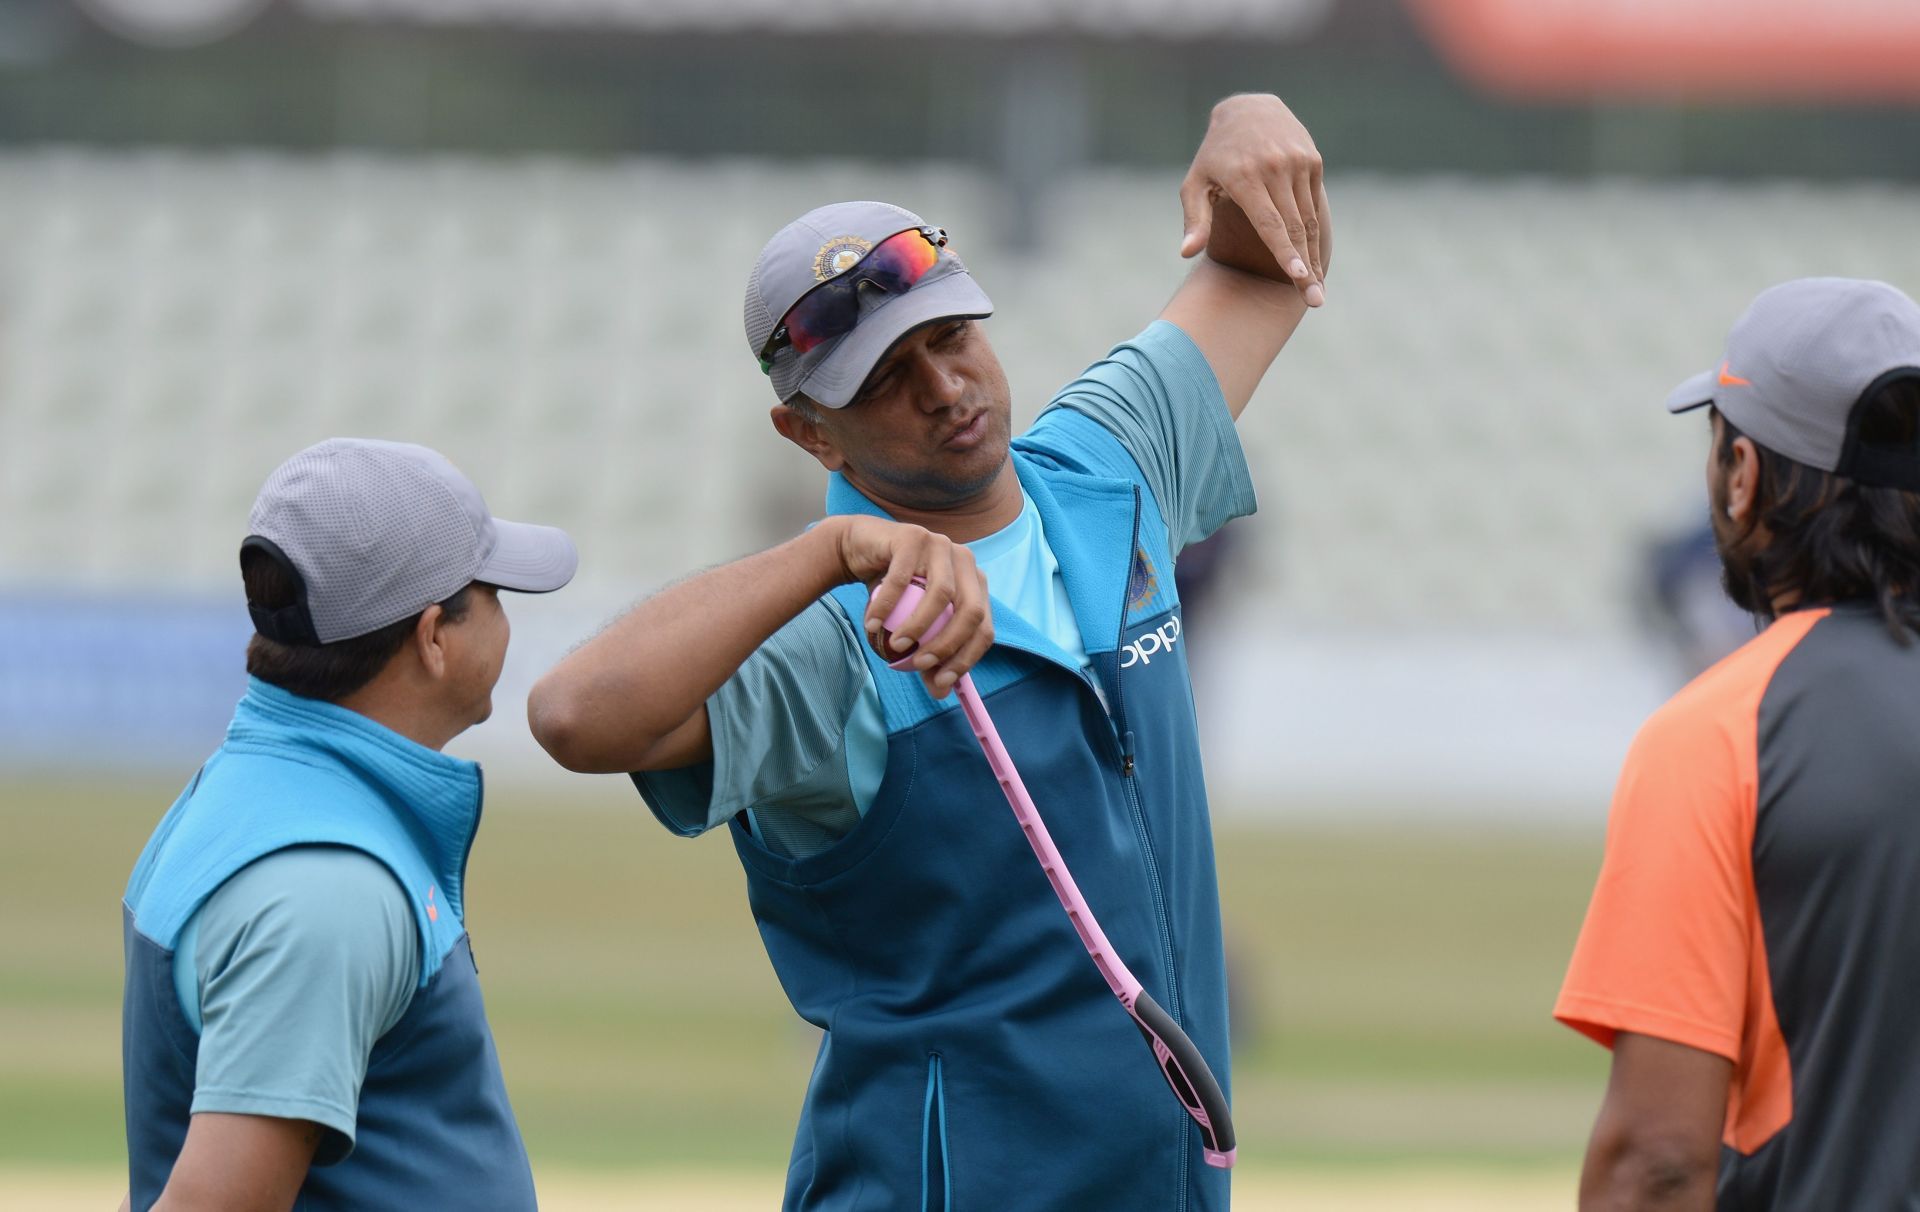 Rahul Dravid will take over Ravi Shastri as the head coach of Team India